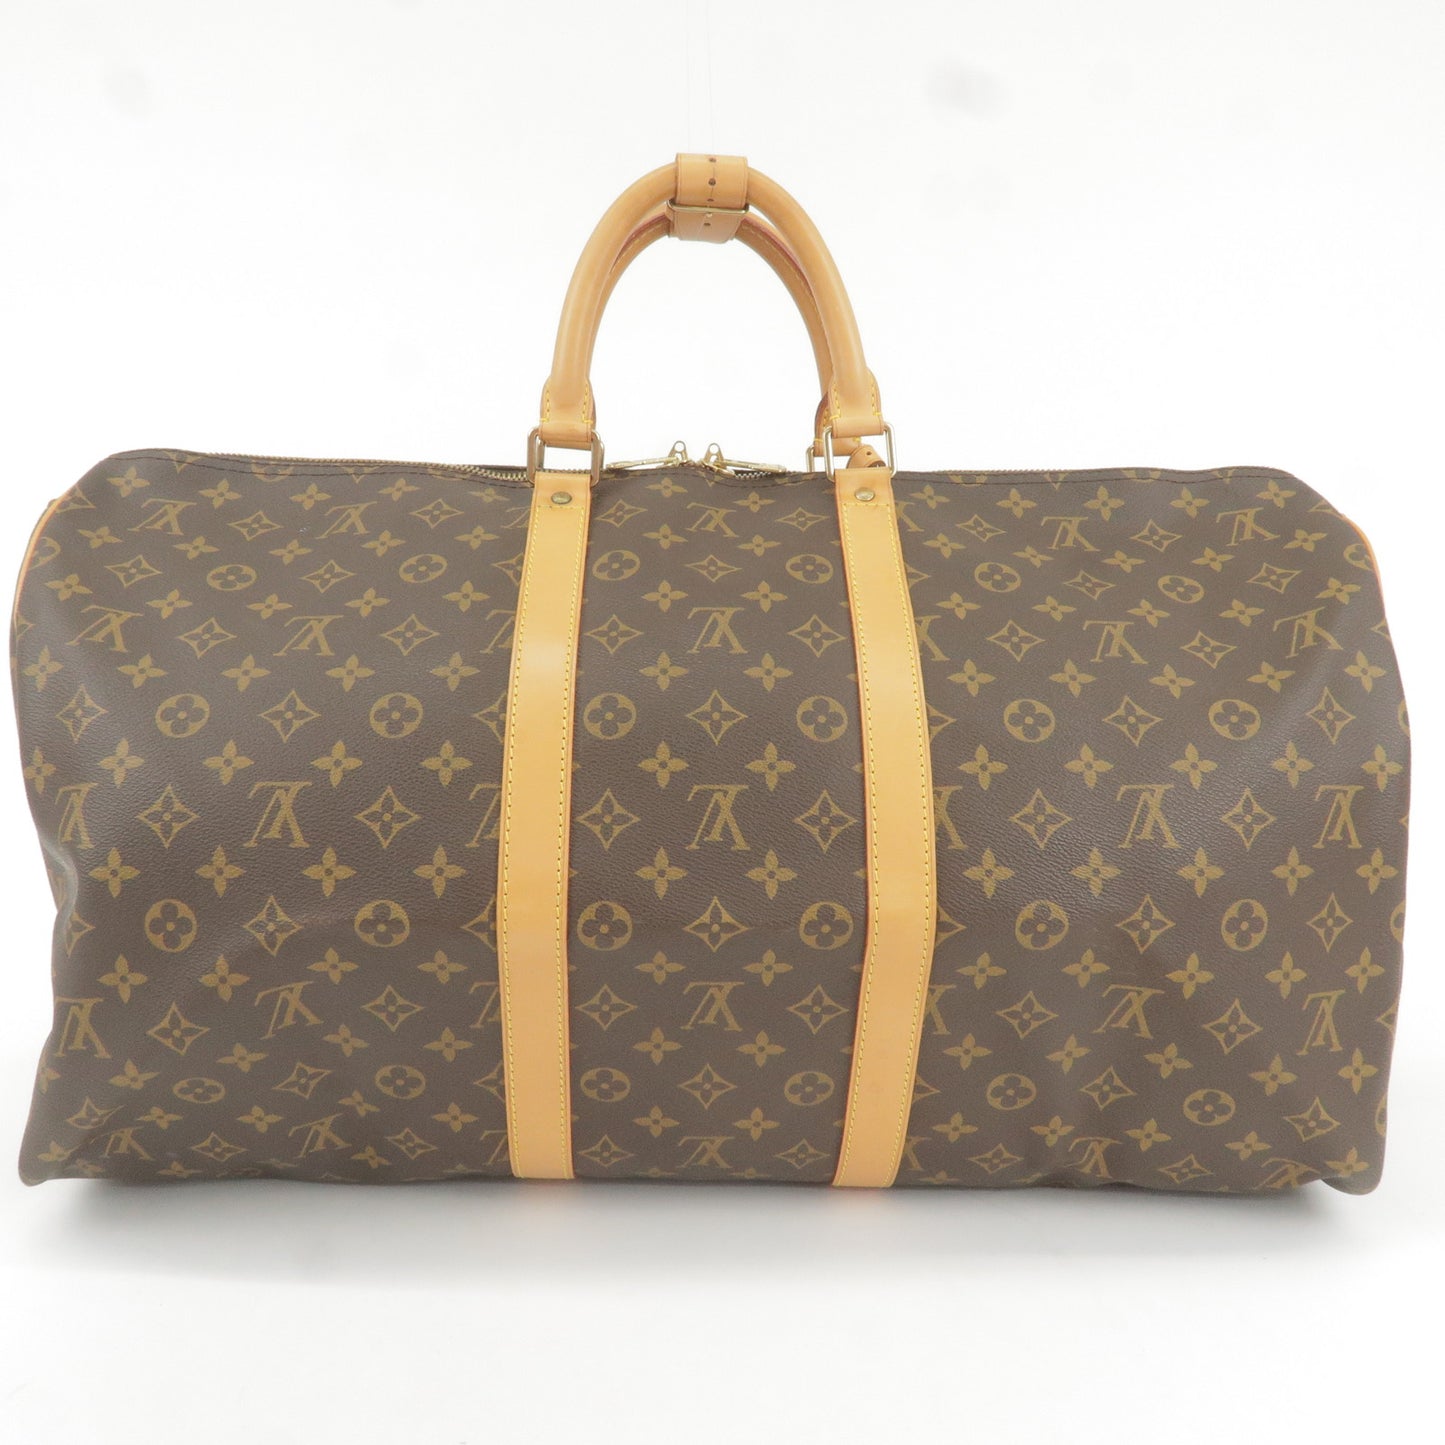 Louis Vuitton 2000 pre-owned Keepall Bandouliere 55 travel bag